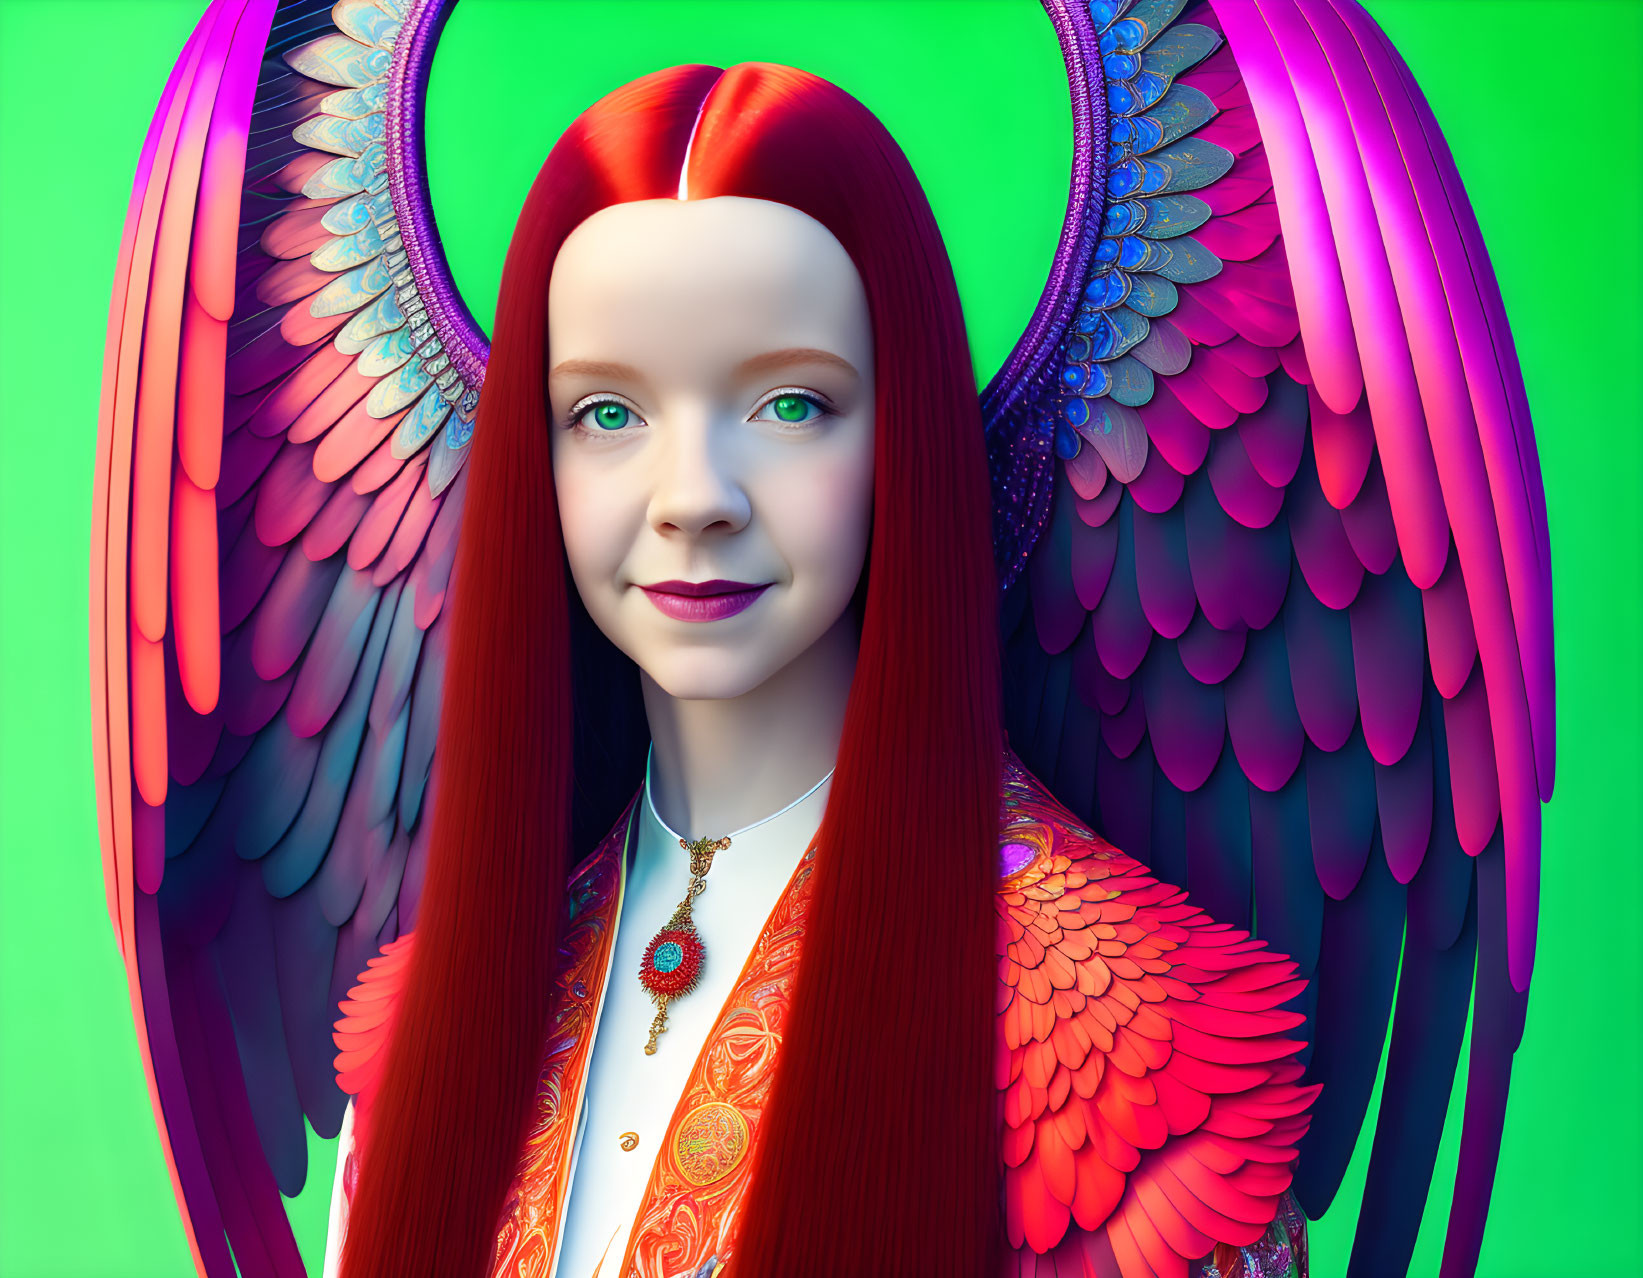 Digital artwork featuring girl with red hair, multicolored wings, ornate orange dress on green background